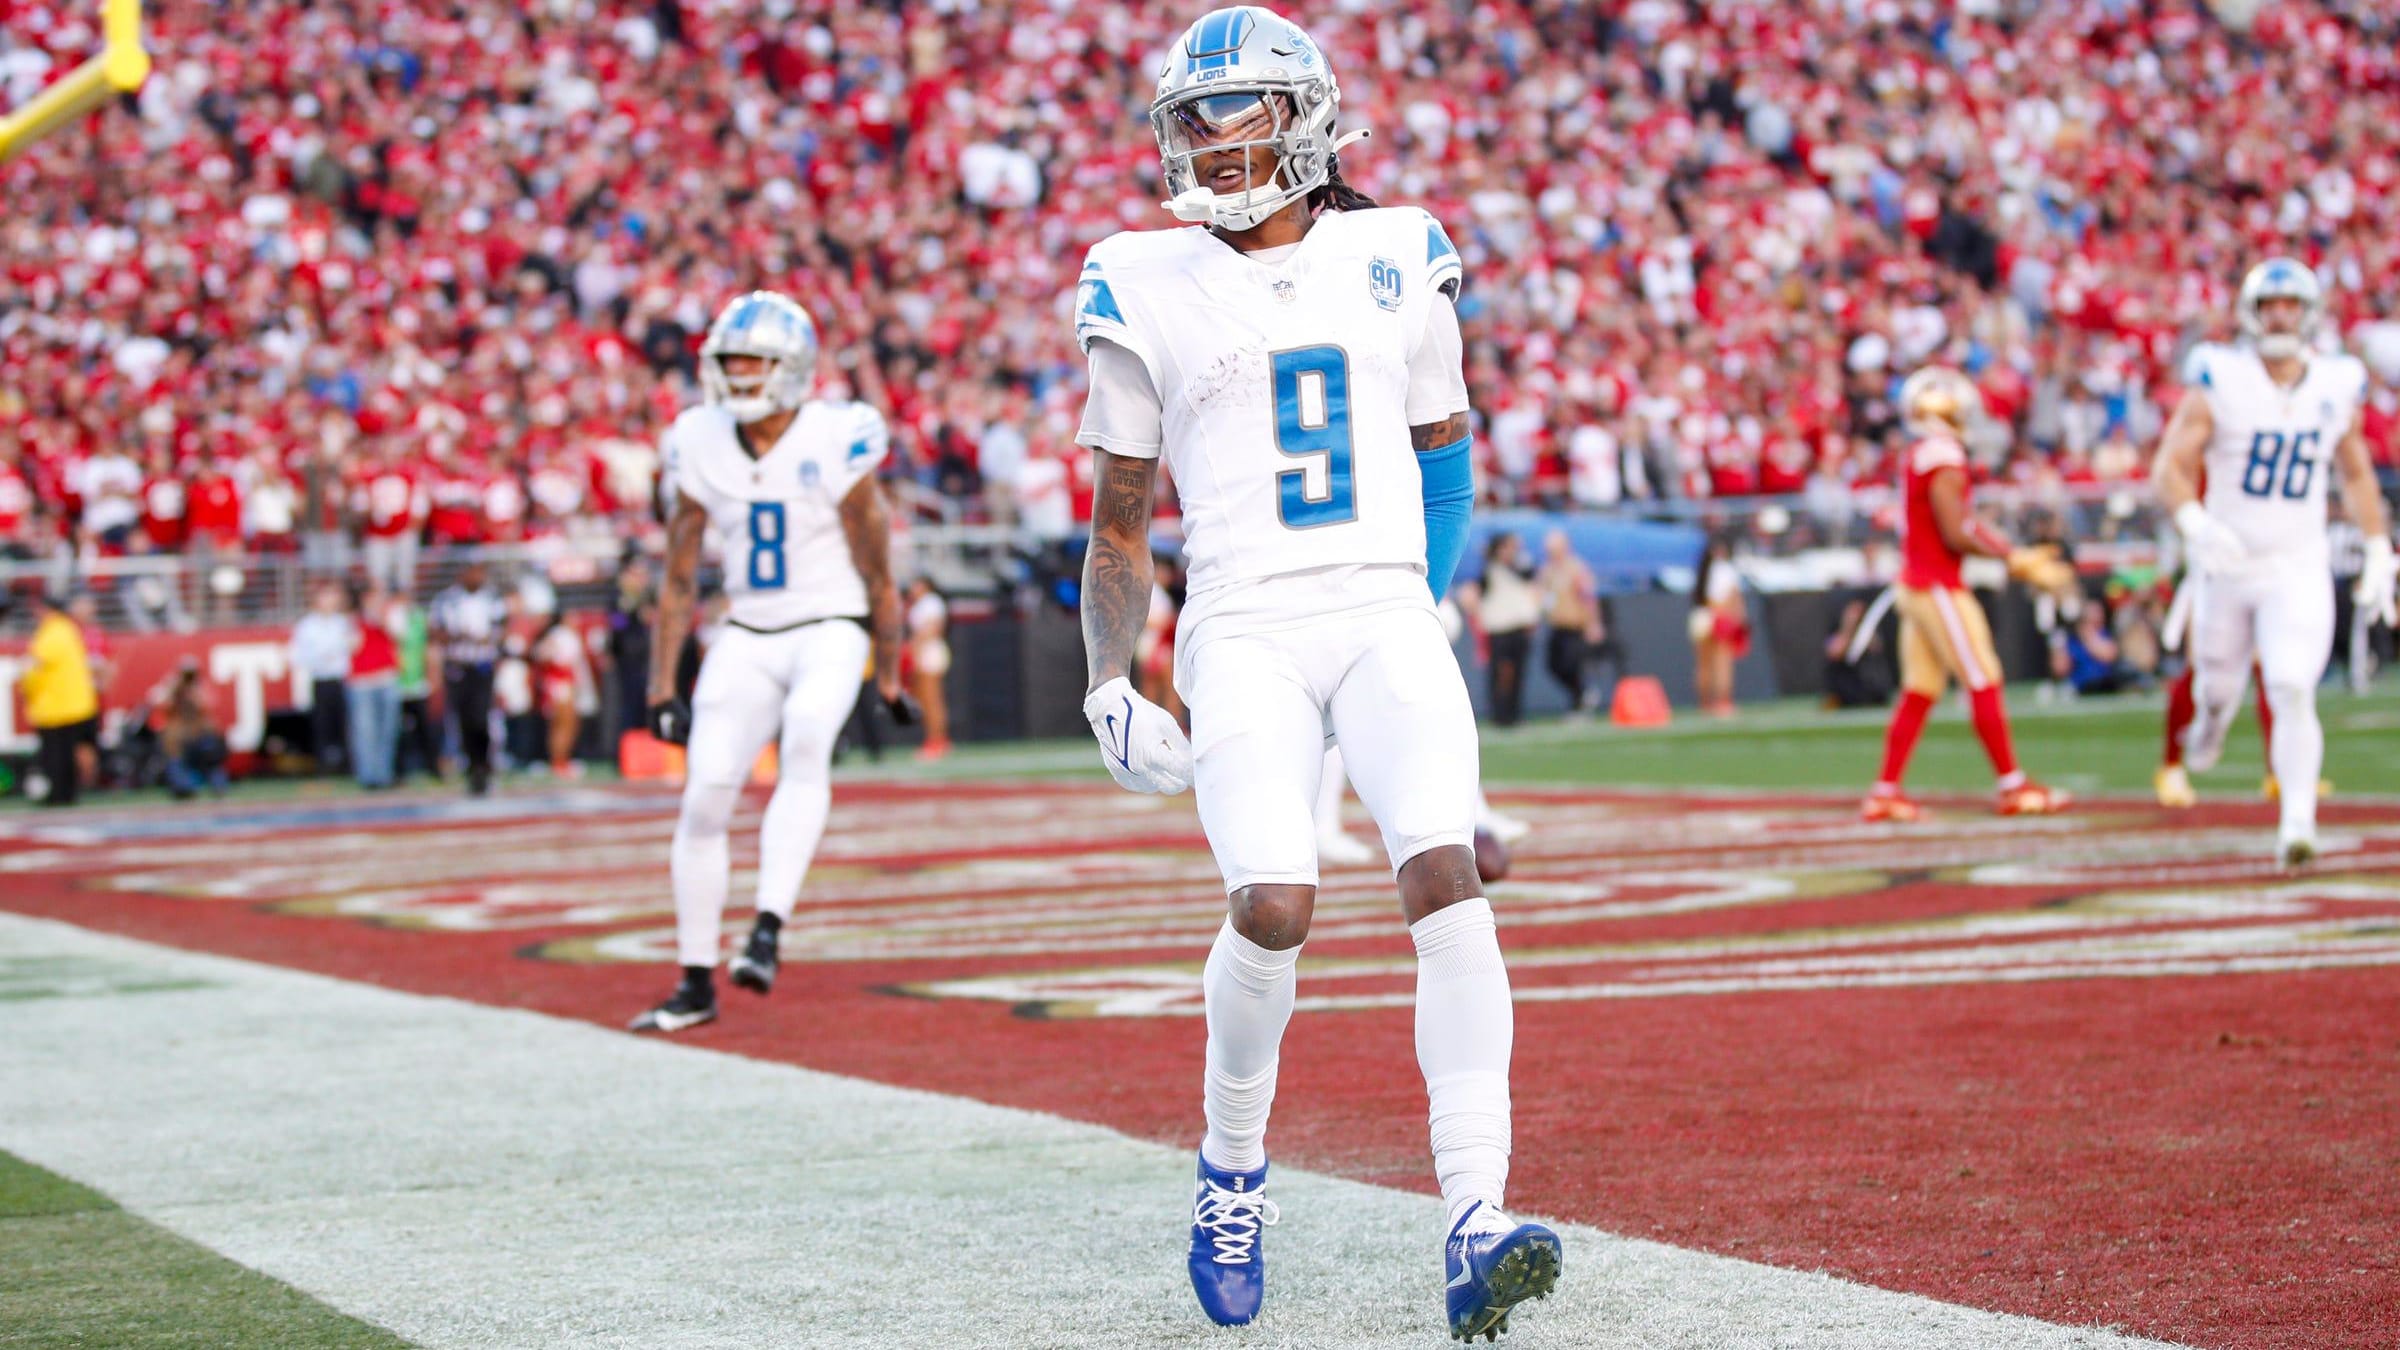 Lions wide receiver Jameson Williams celebrates a touchdown against the 49ers in the first quarter.